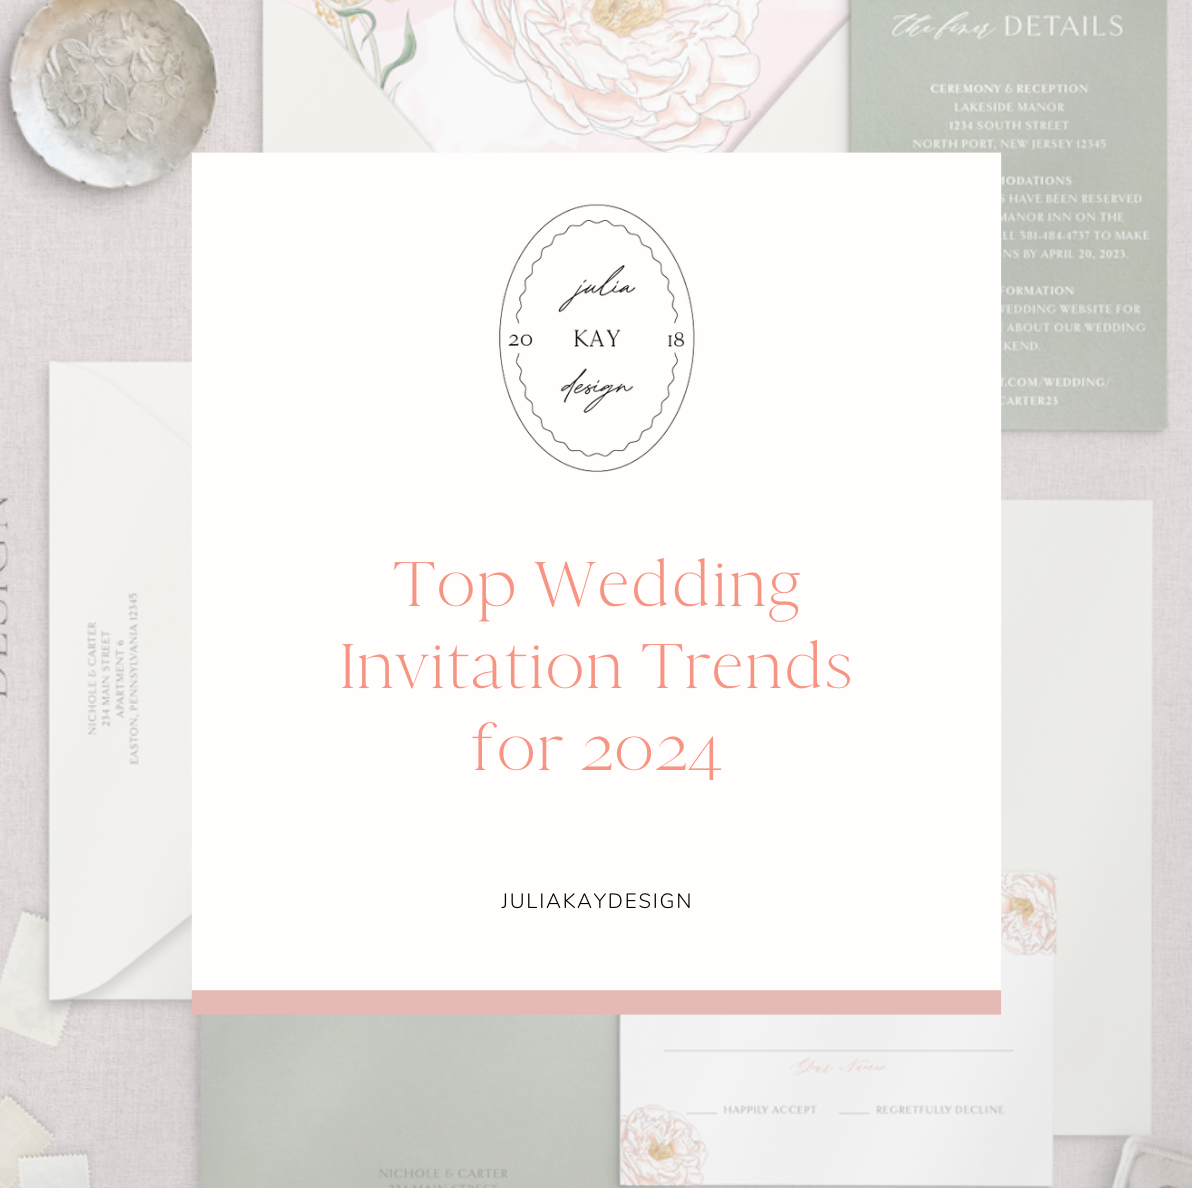 Top Wedding Invitation Trends for 2024